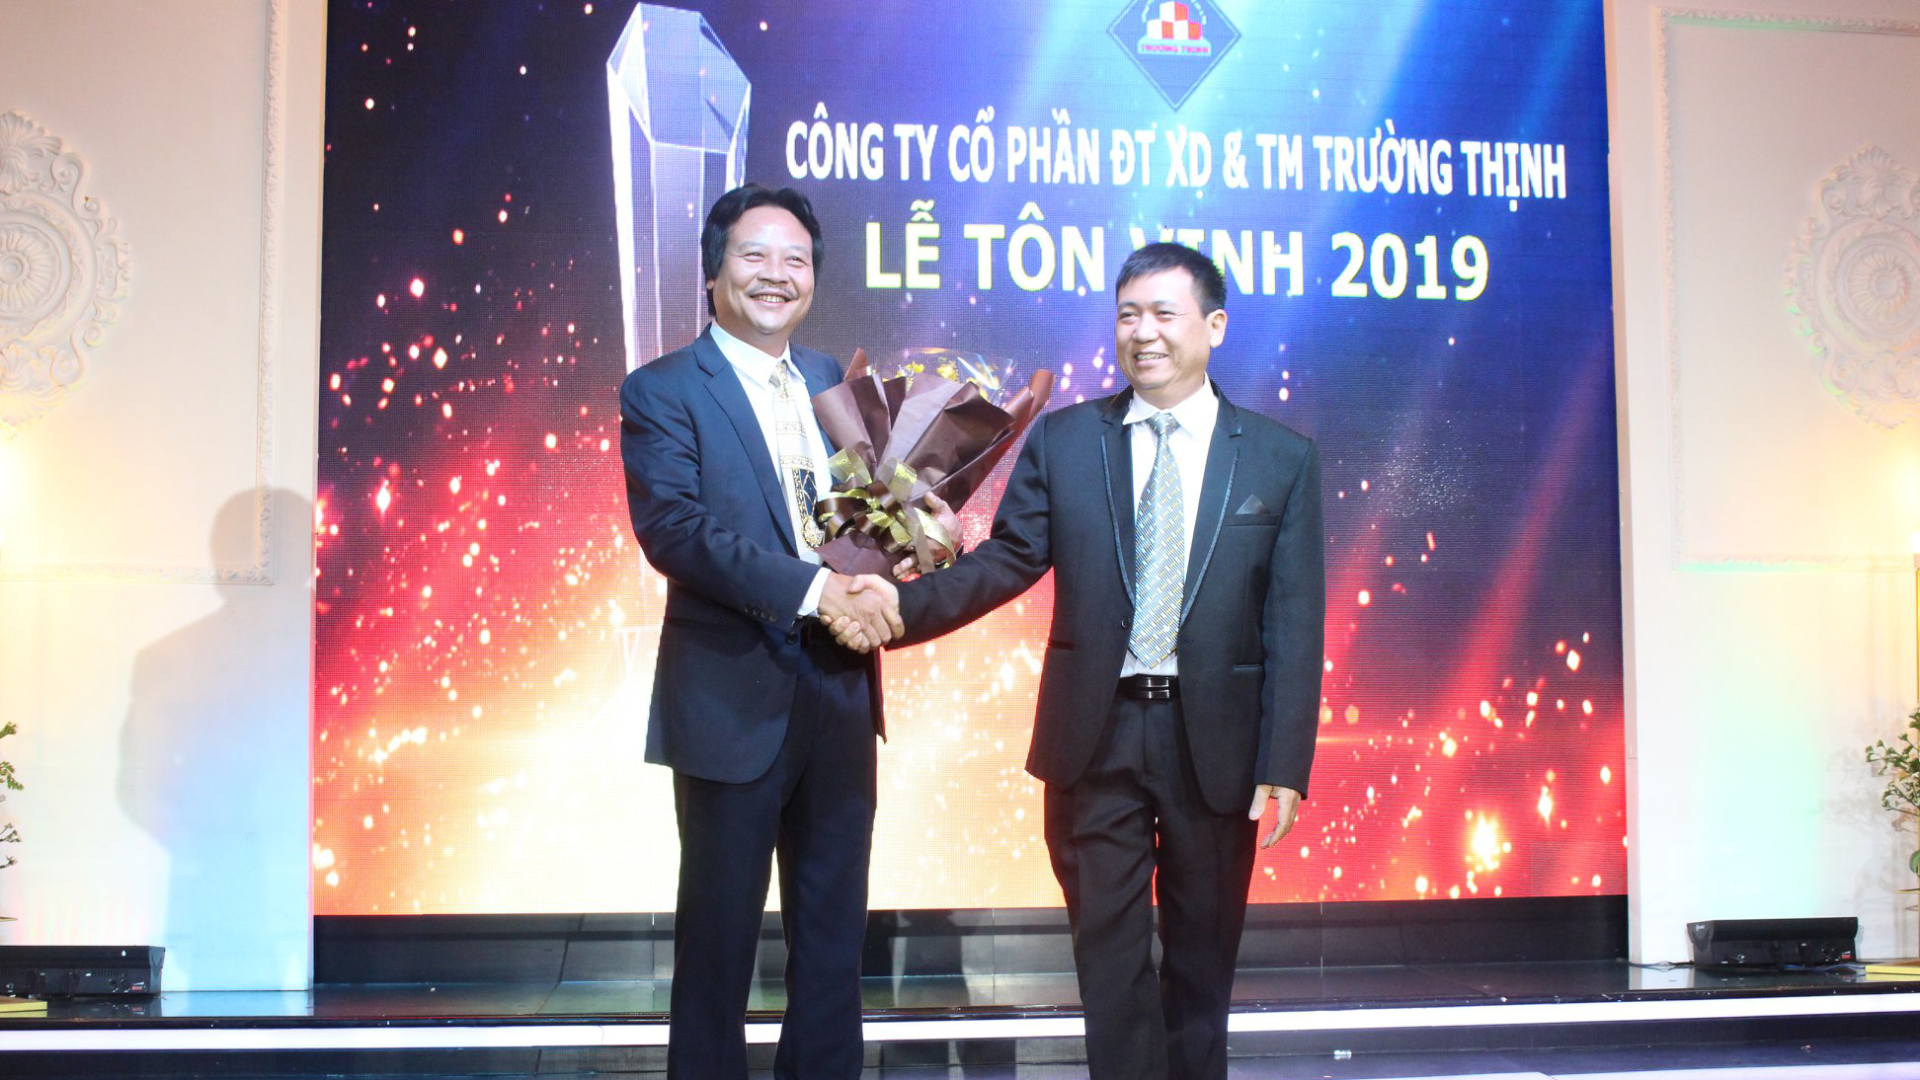 OVERVIEW - TRUONGTHINH 2019